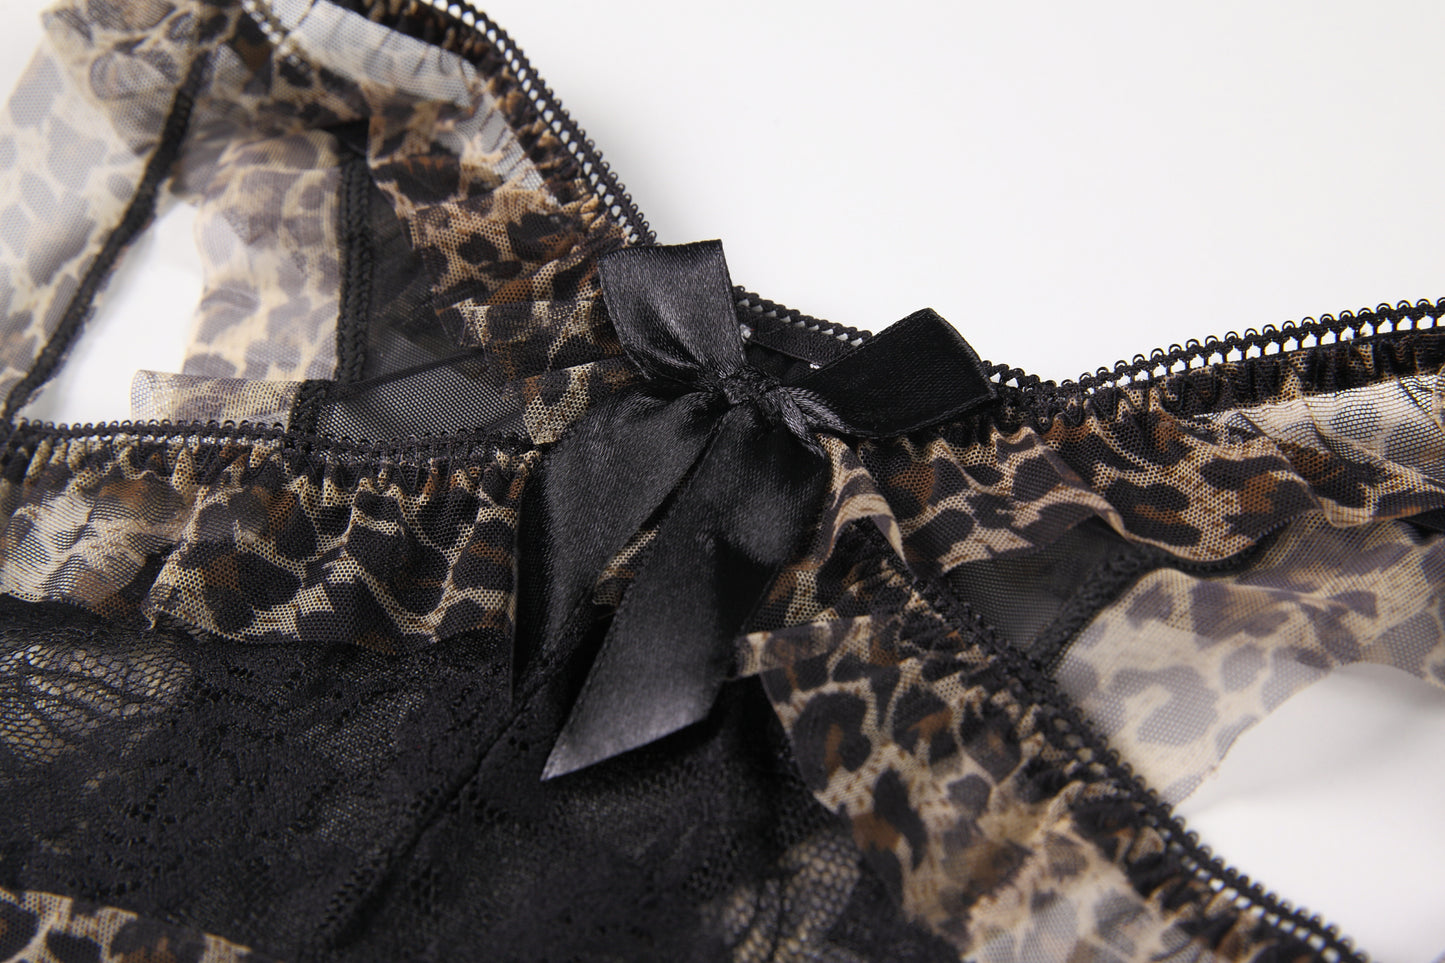 Leopard Print Lace Panties - Sheer Mesh with Floral Details